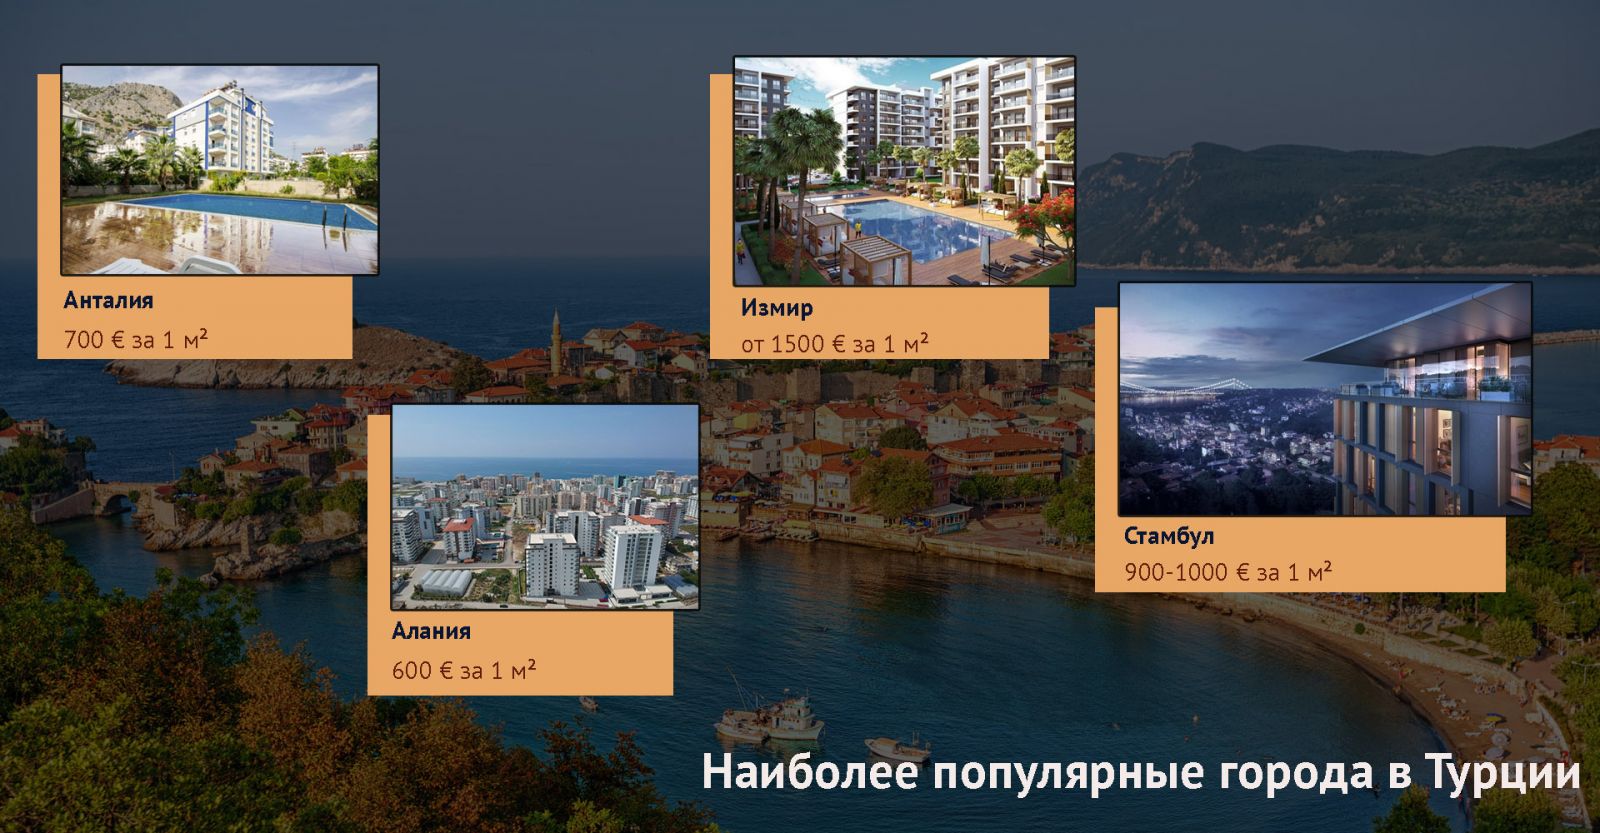 Property Prices of Turkey's Most Popular Cities